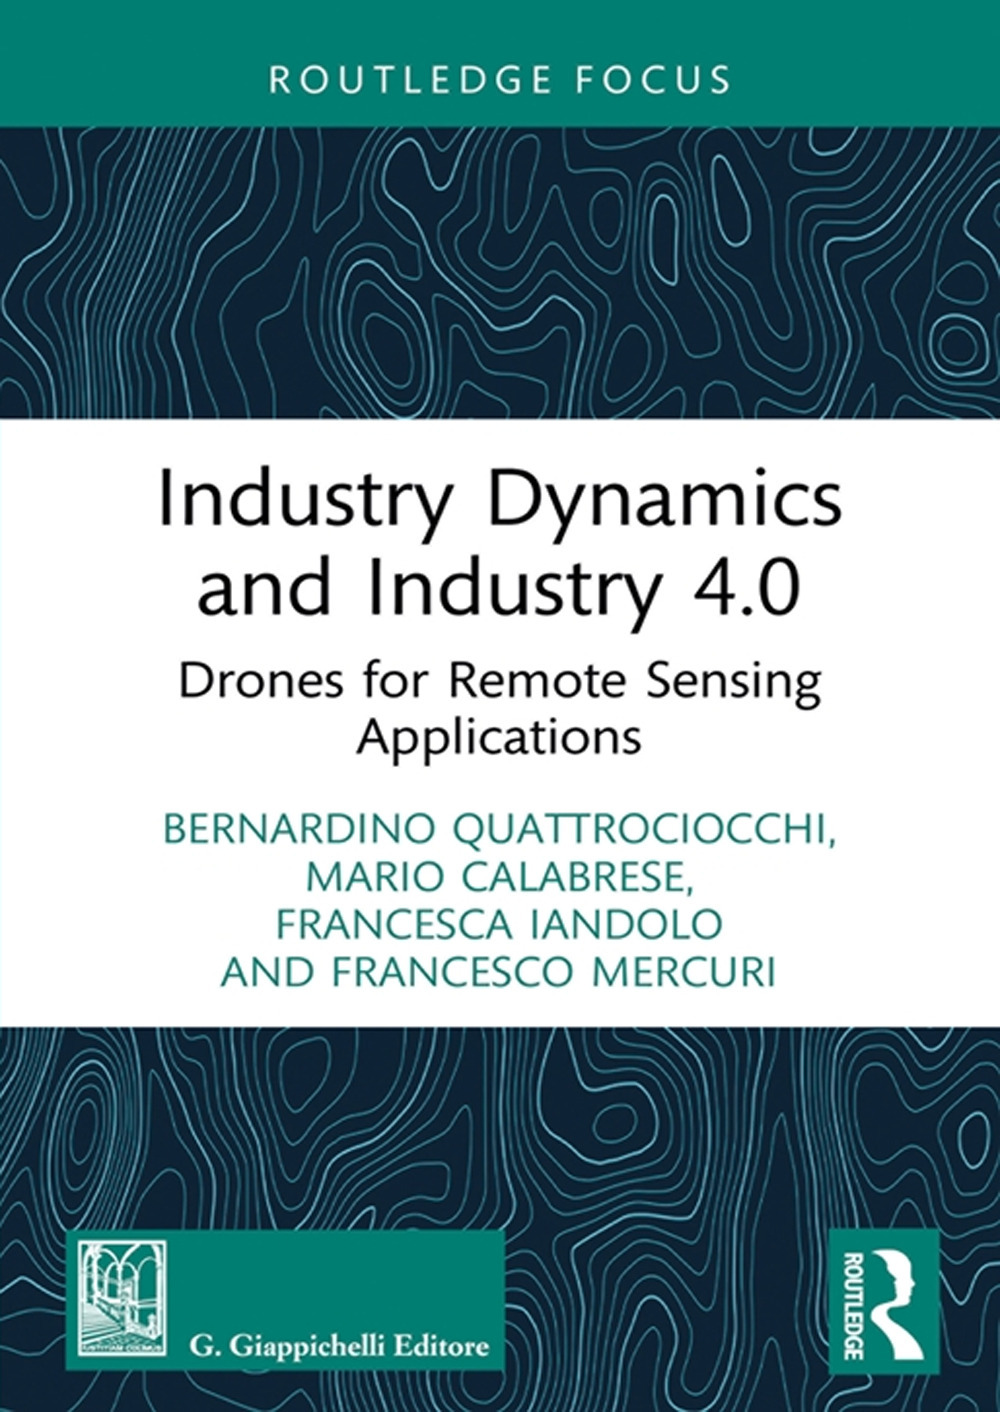 Industry dynamics and industry 4.0. Drones for remote sensing applications